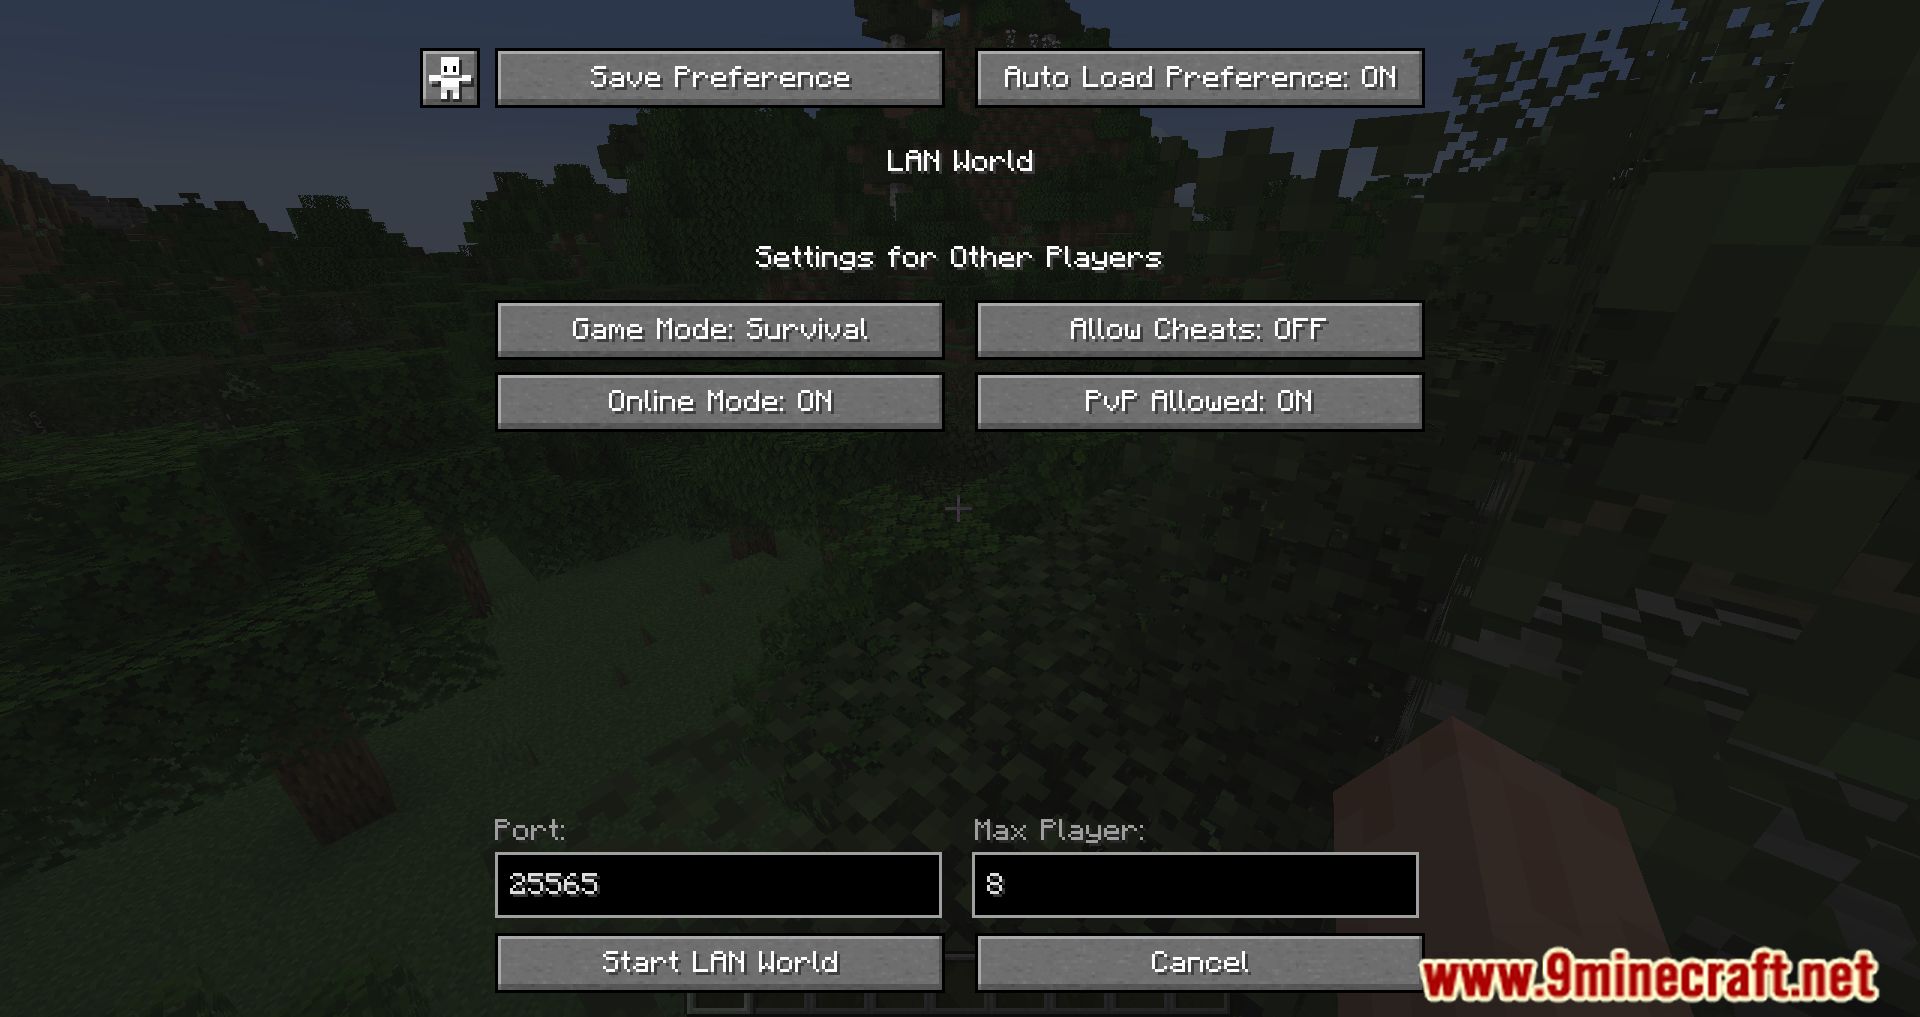 Lan Server Properties Mod (1.20.4, 1.19.4) - Allows You To Enable Or Disable PVP 5